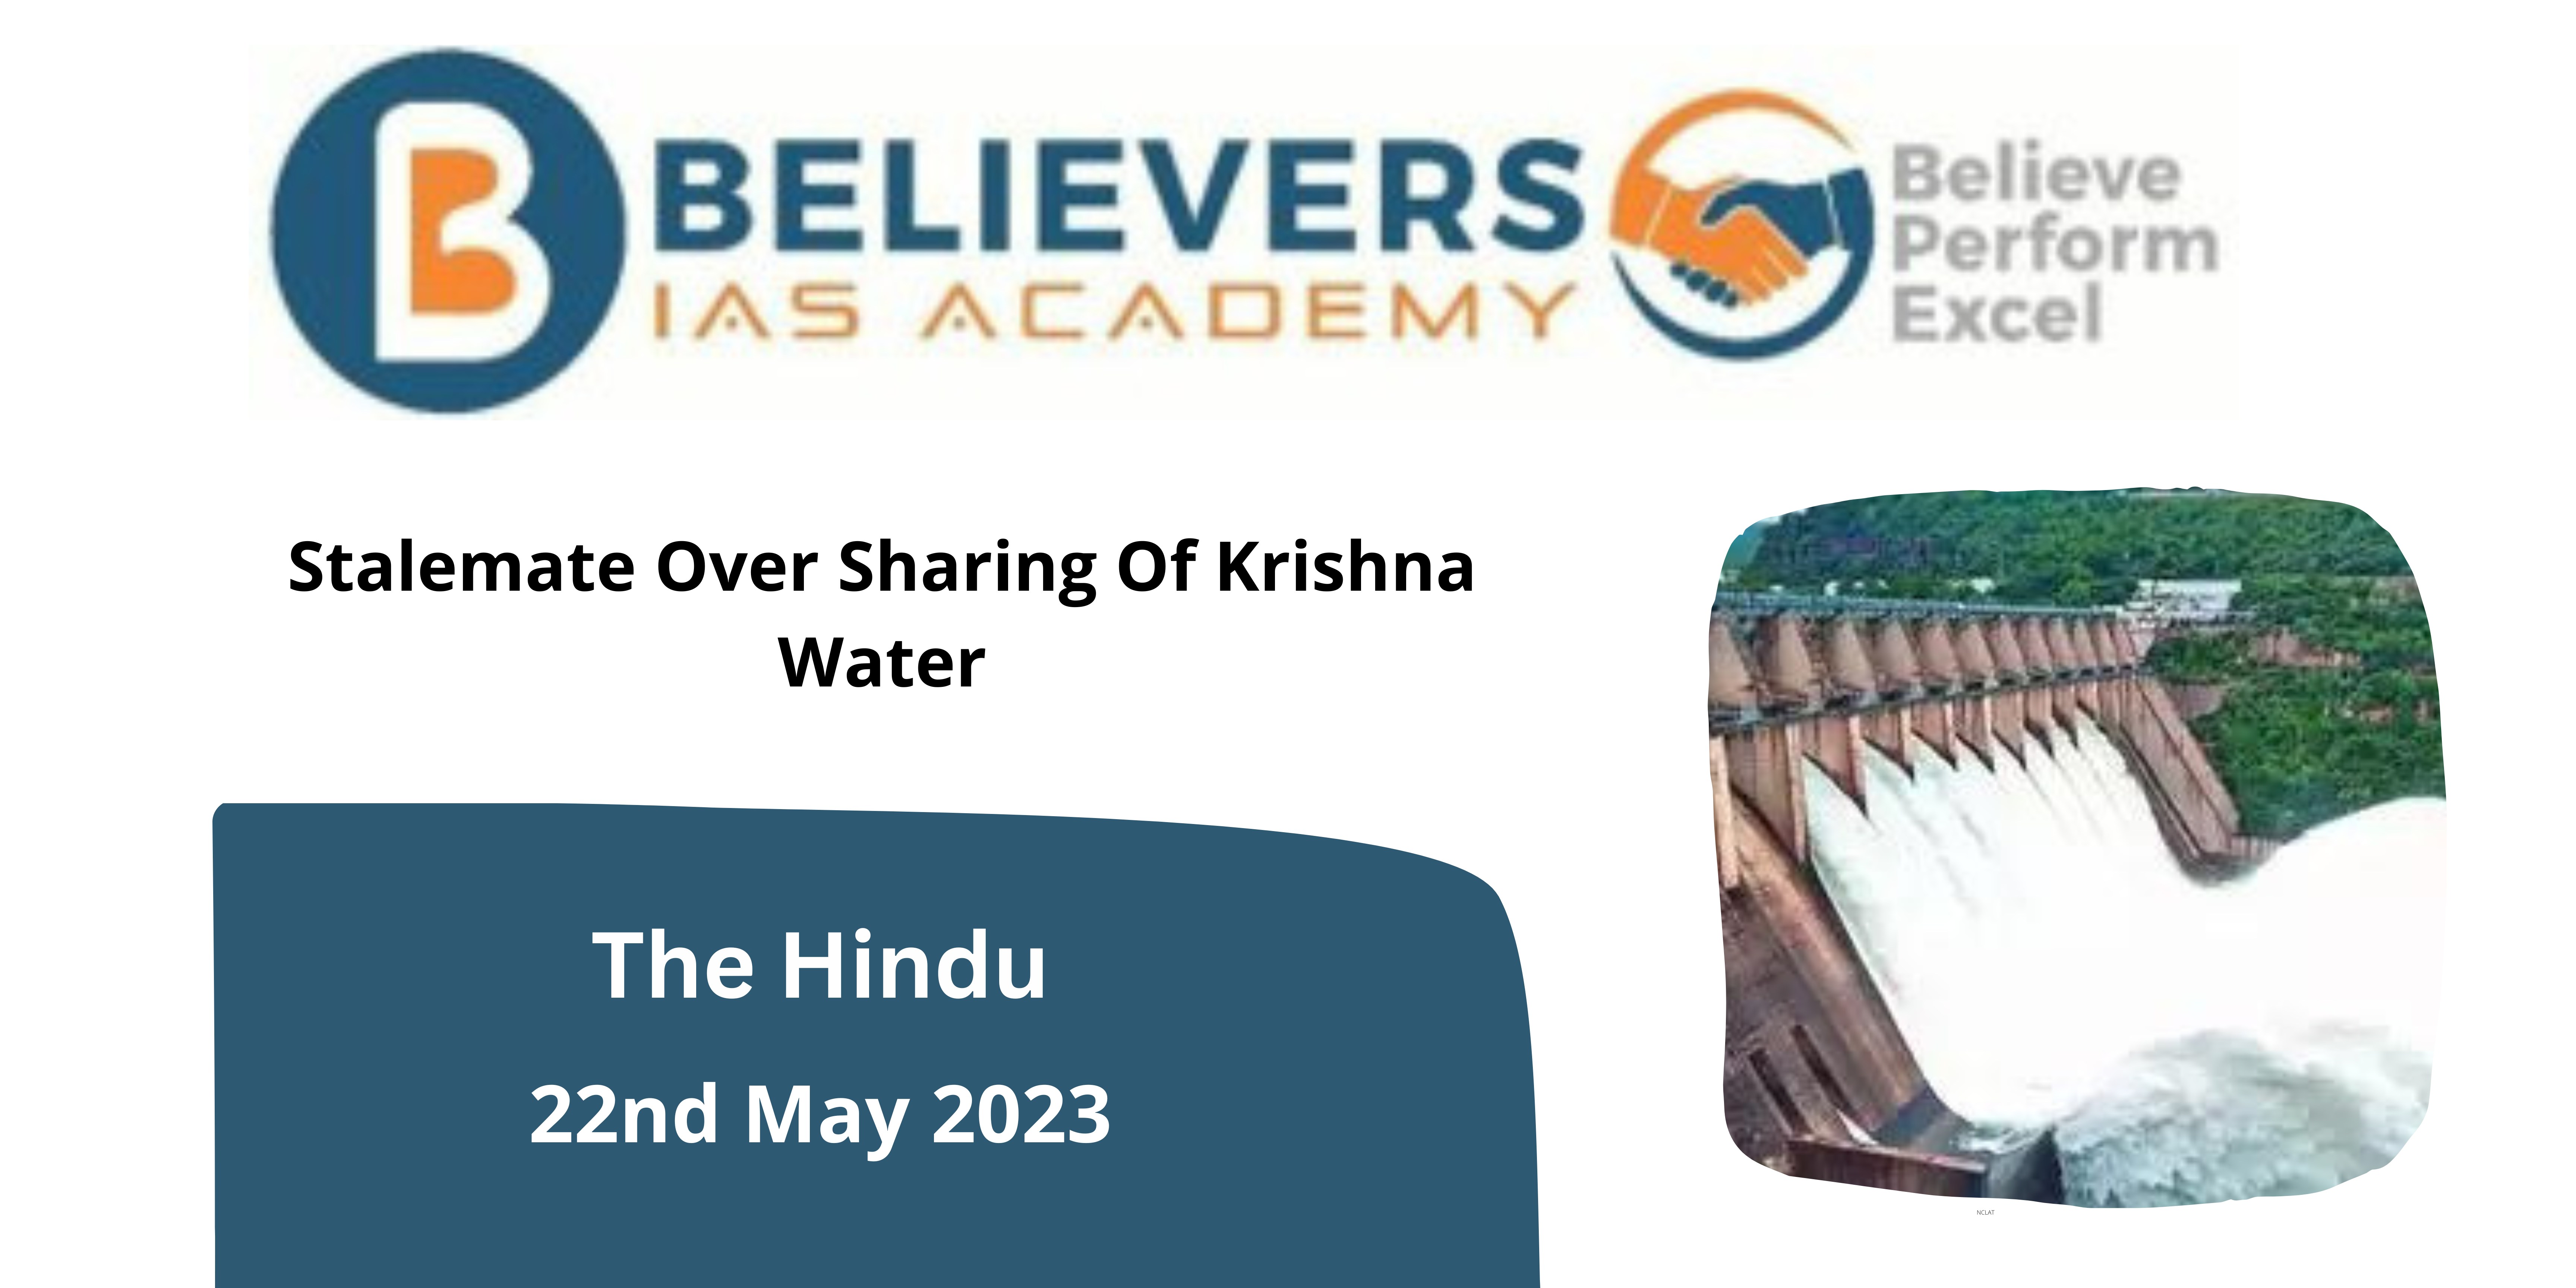 Stalemate Over Sharing Of Krishna Water